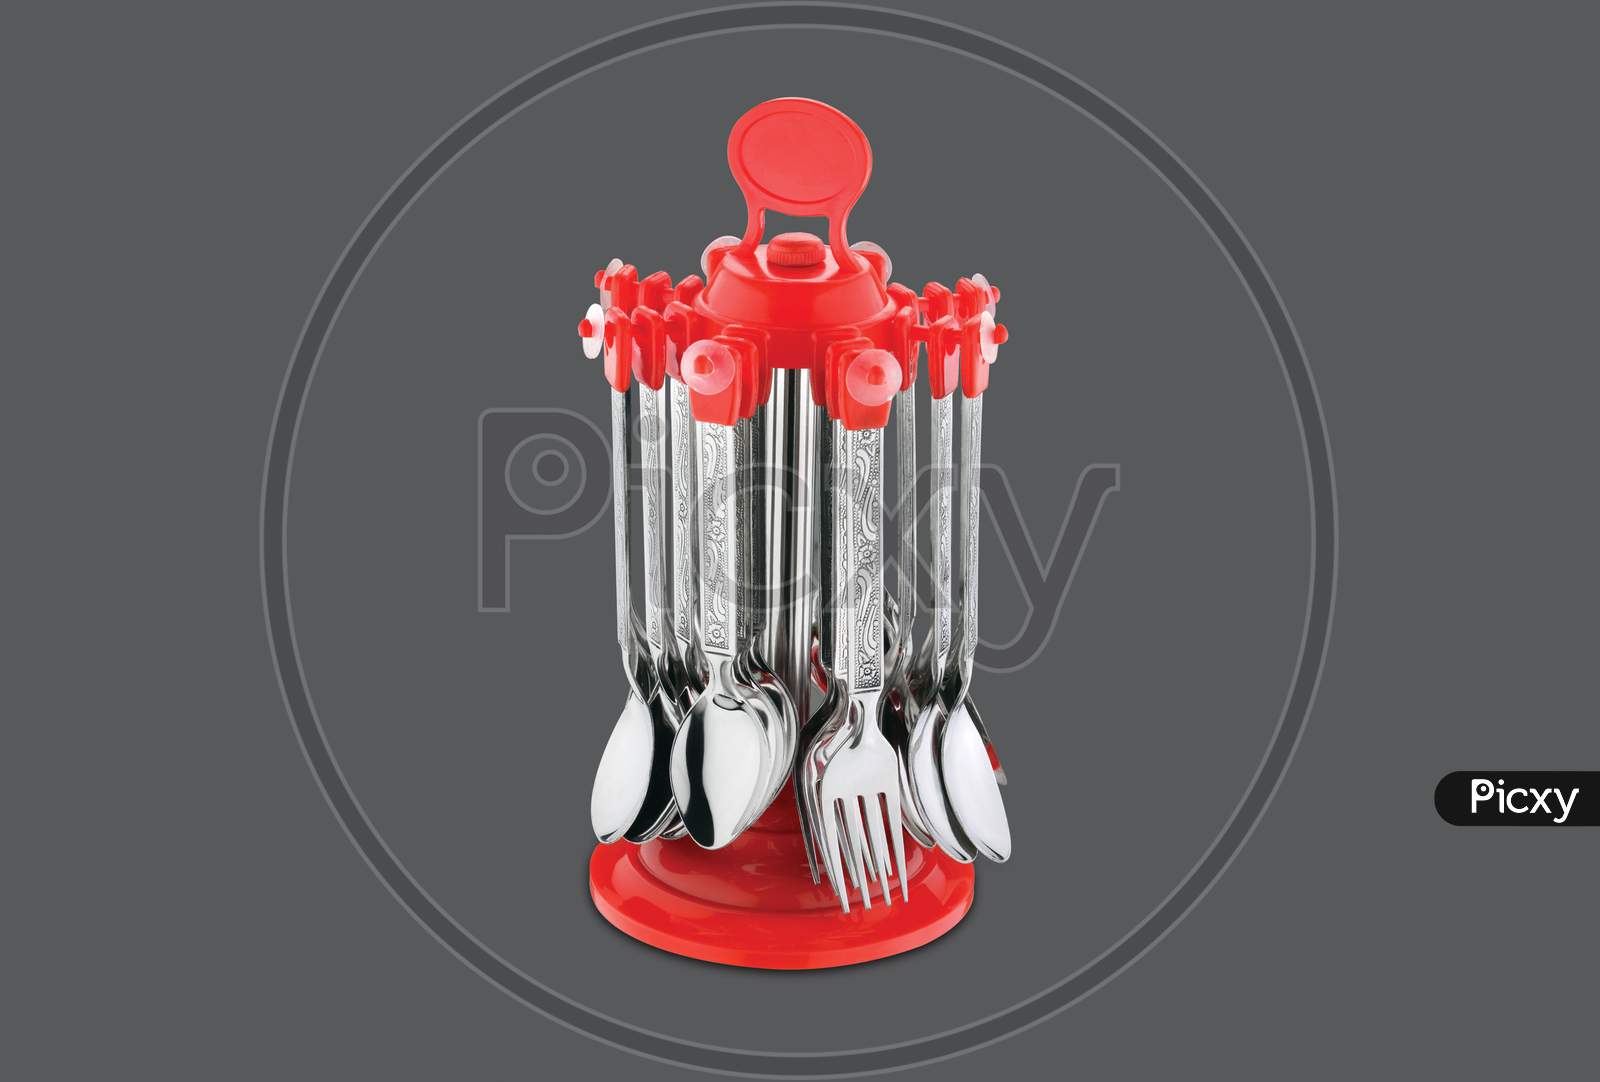 Spoons Cutlery Set With Stand Stainless Steel